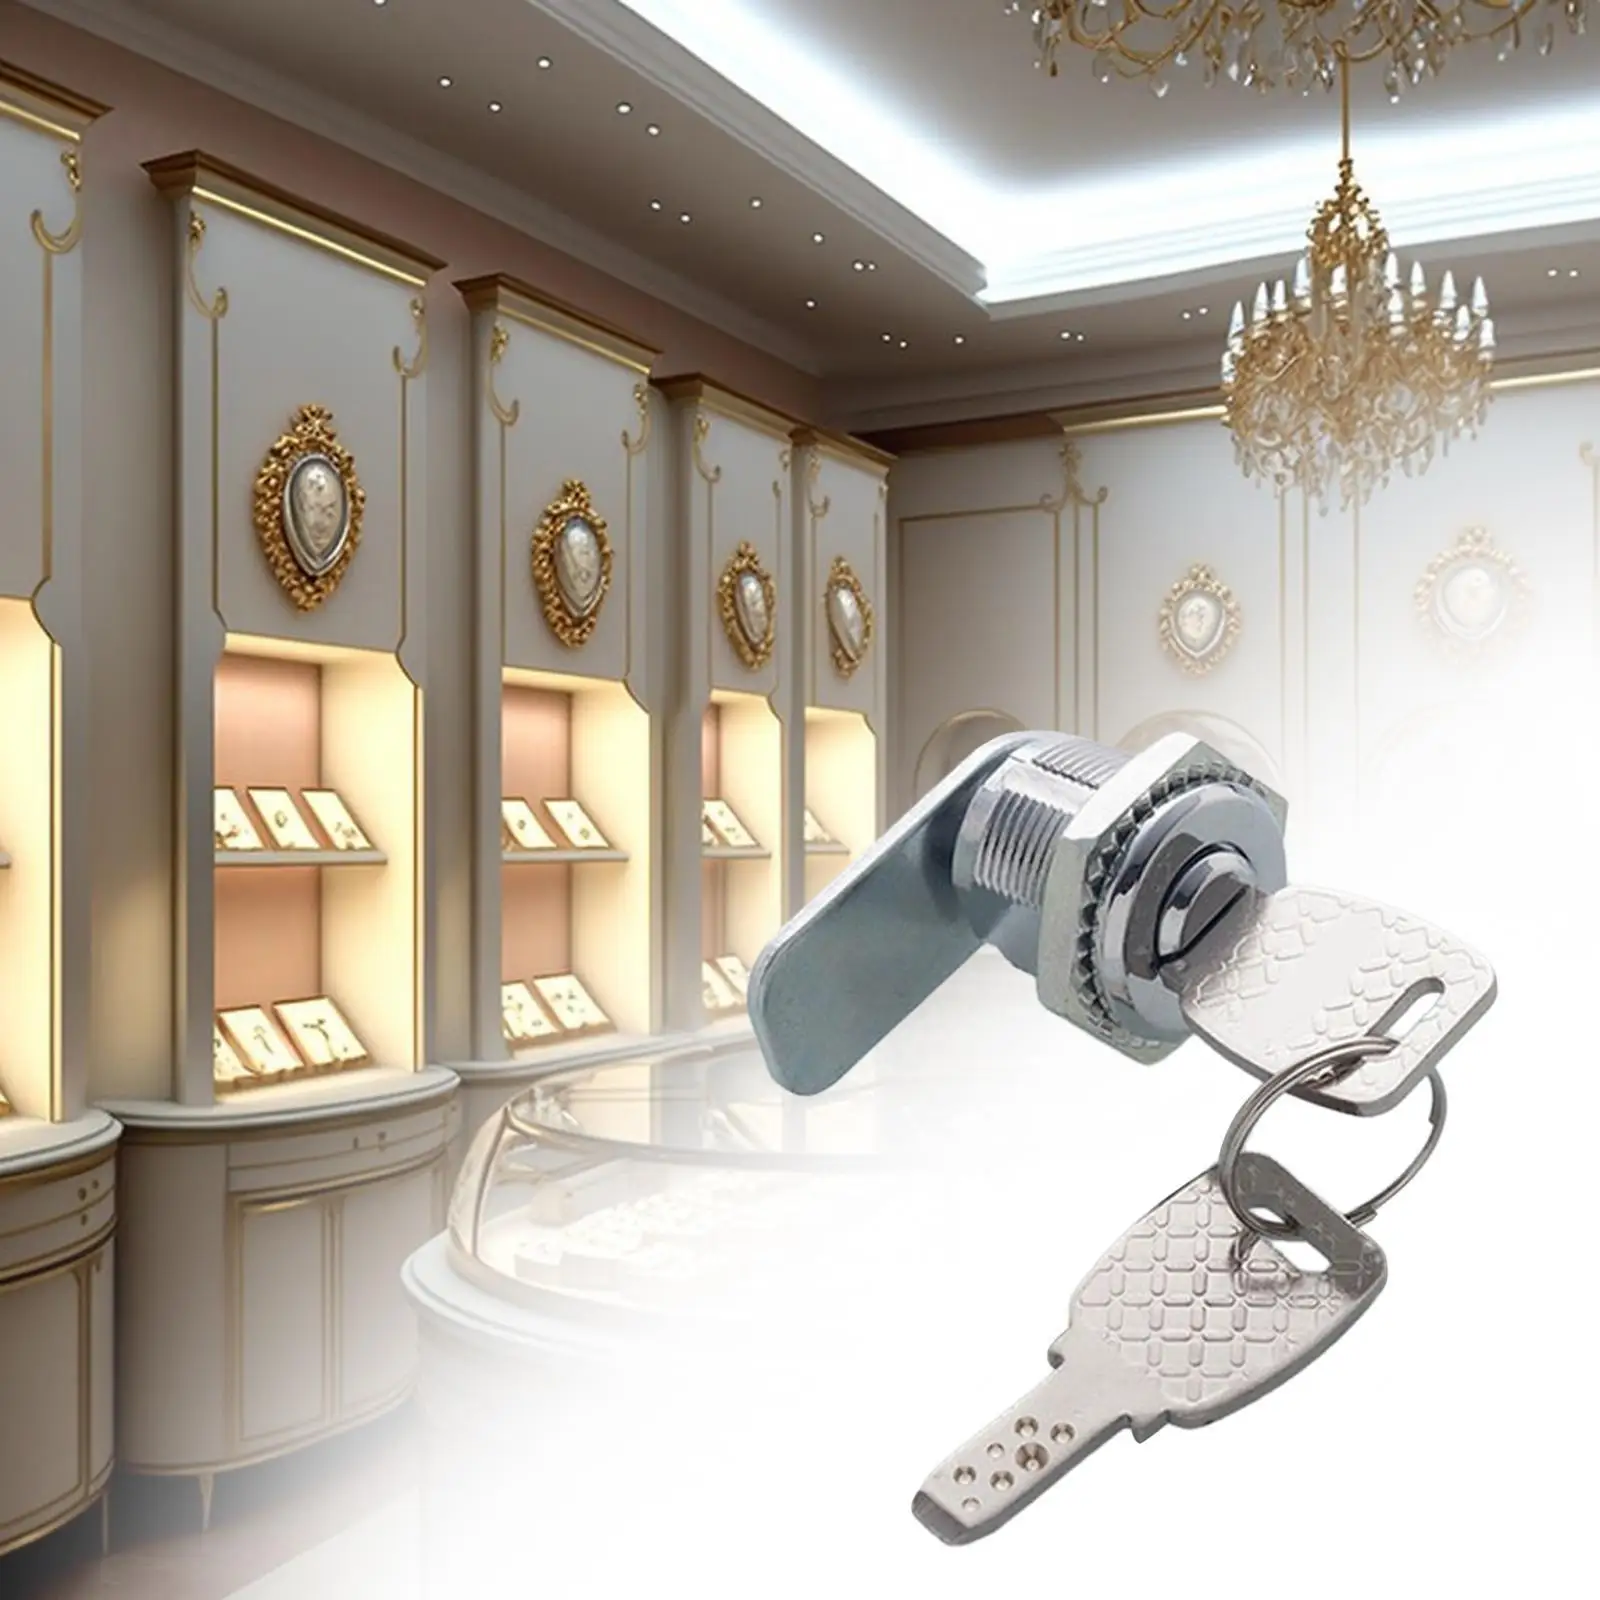 Cabinet cam Lock Furniture Lock with 2 Keys Sturdy Professional Zinc Alloy for Showcase Furniture Coffer Vehicle Cabinet